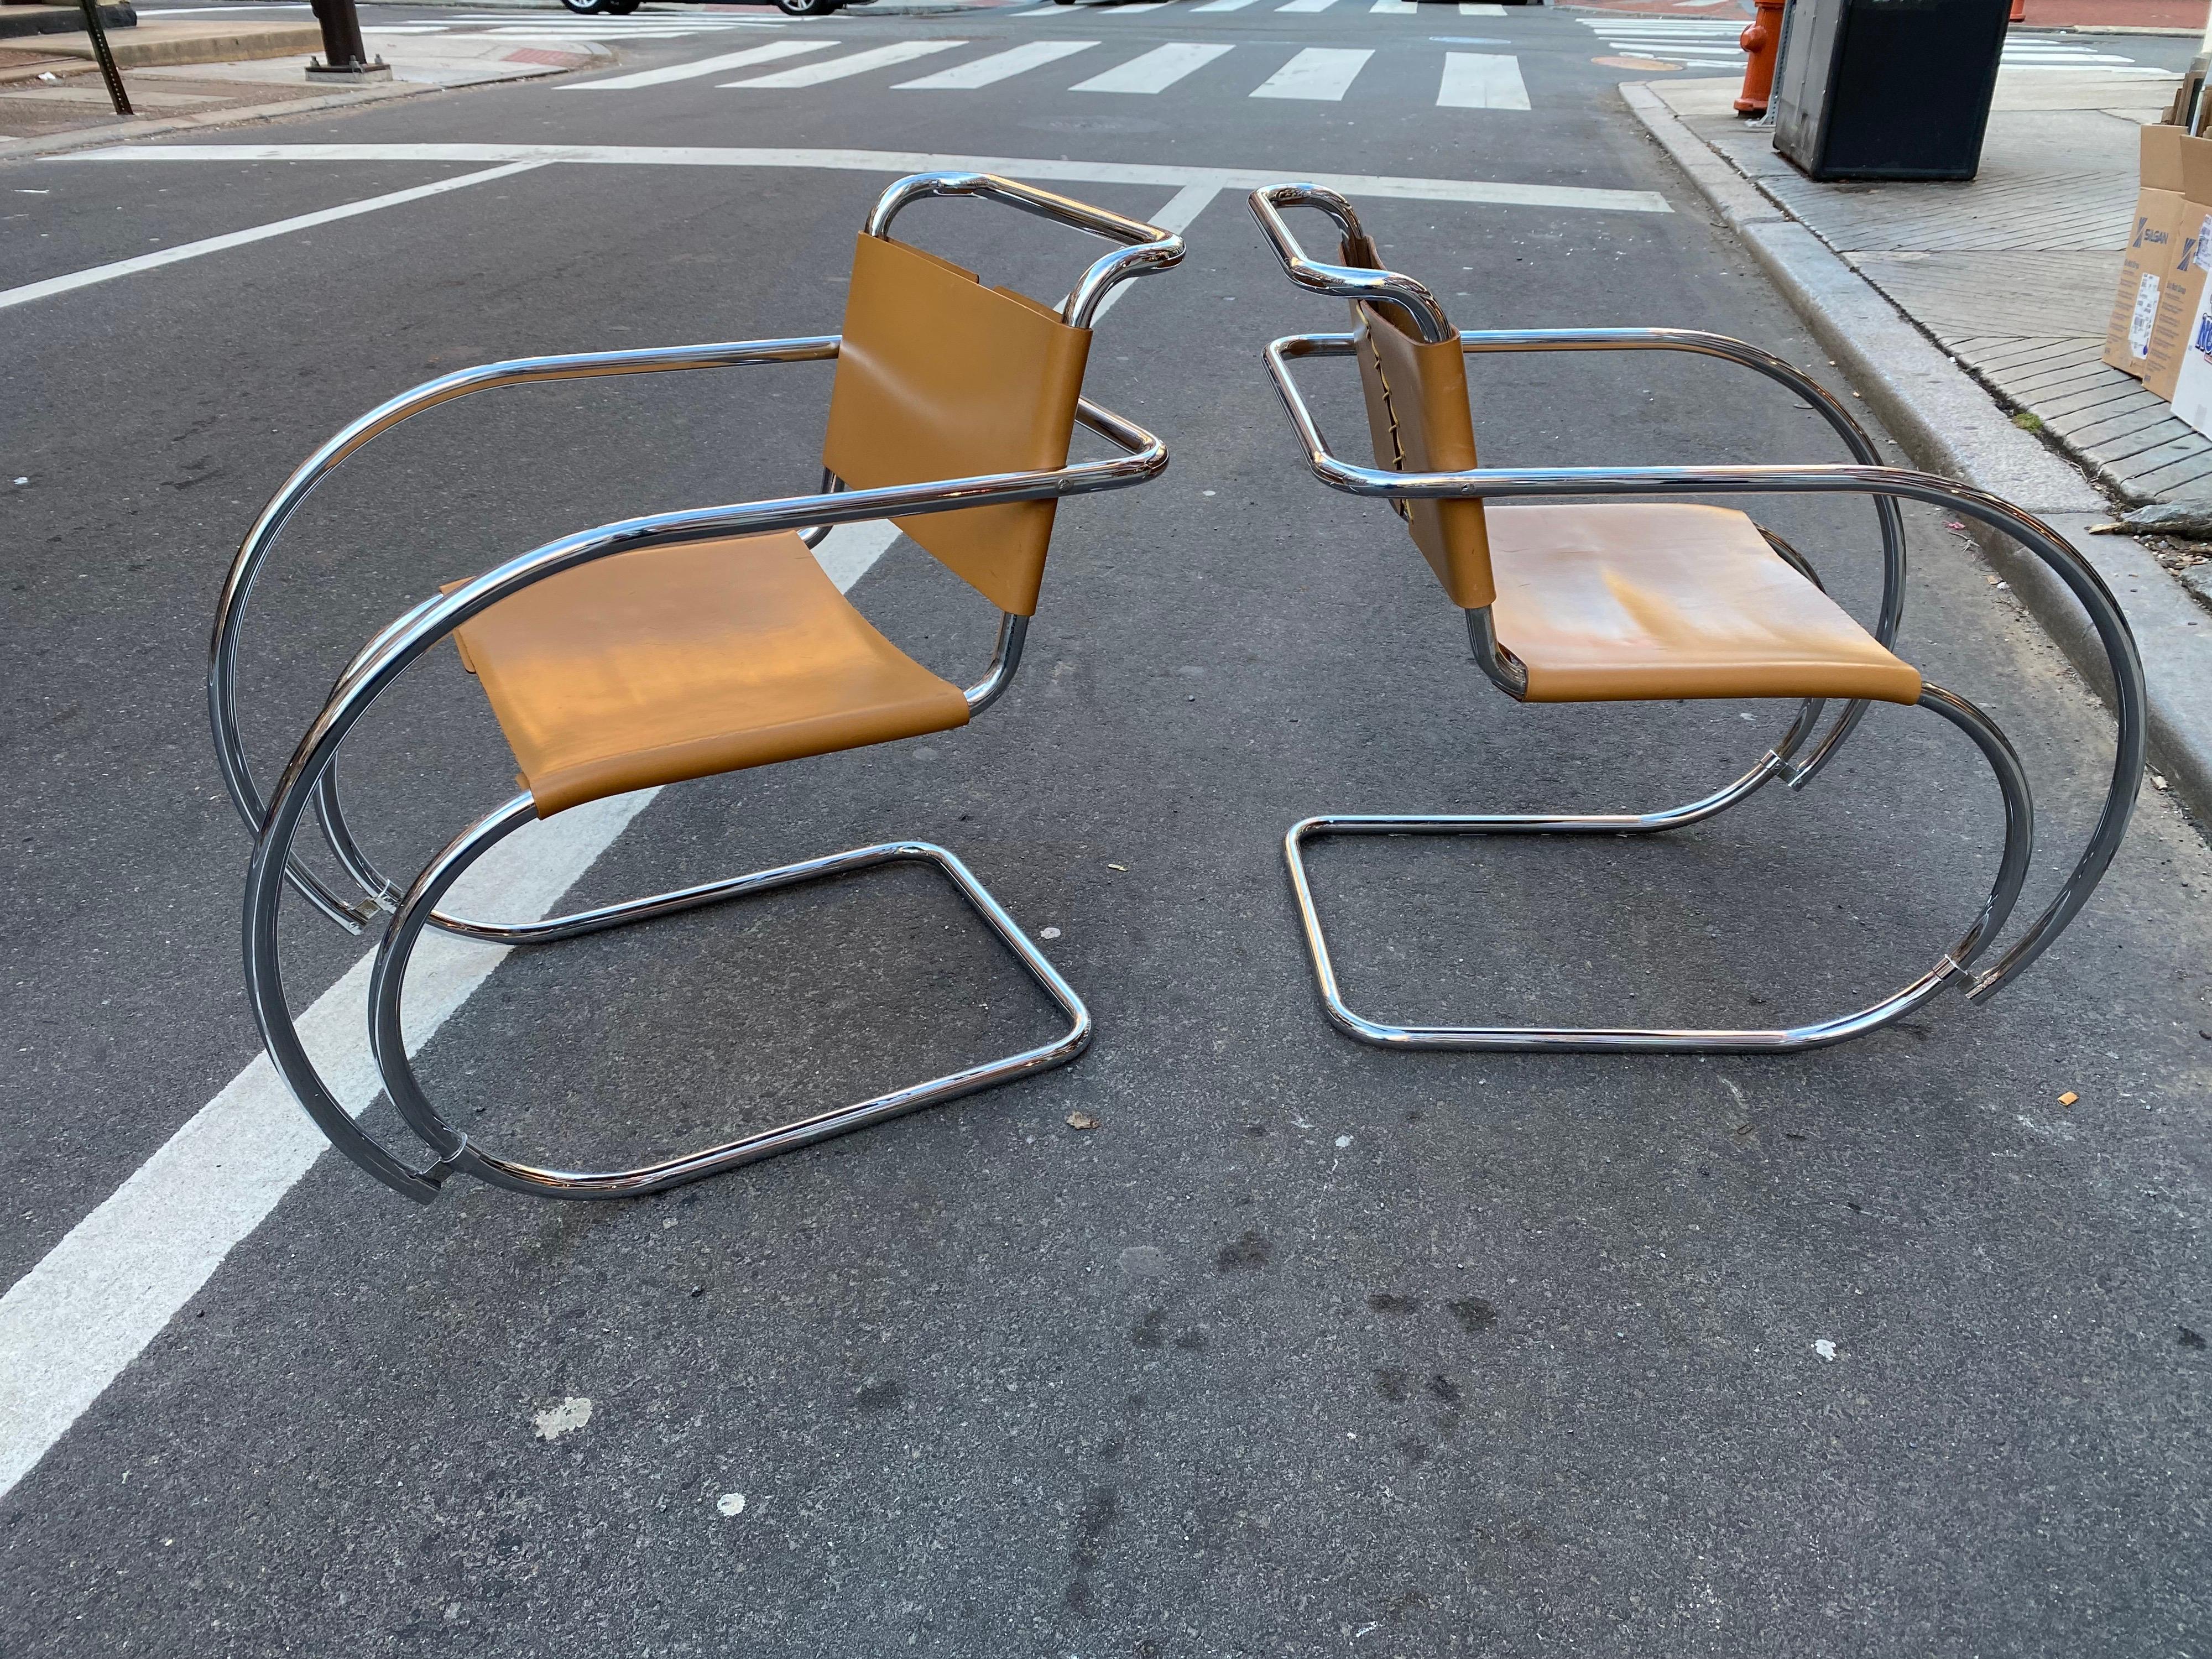 Pair of Mies Van der Rohr MR Lounge Chairs. Chairs probably date to the 1980's. Chrome in very good shape and Tan Leather Slings show minimal wear. Classic Modern Design!